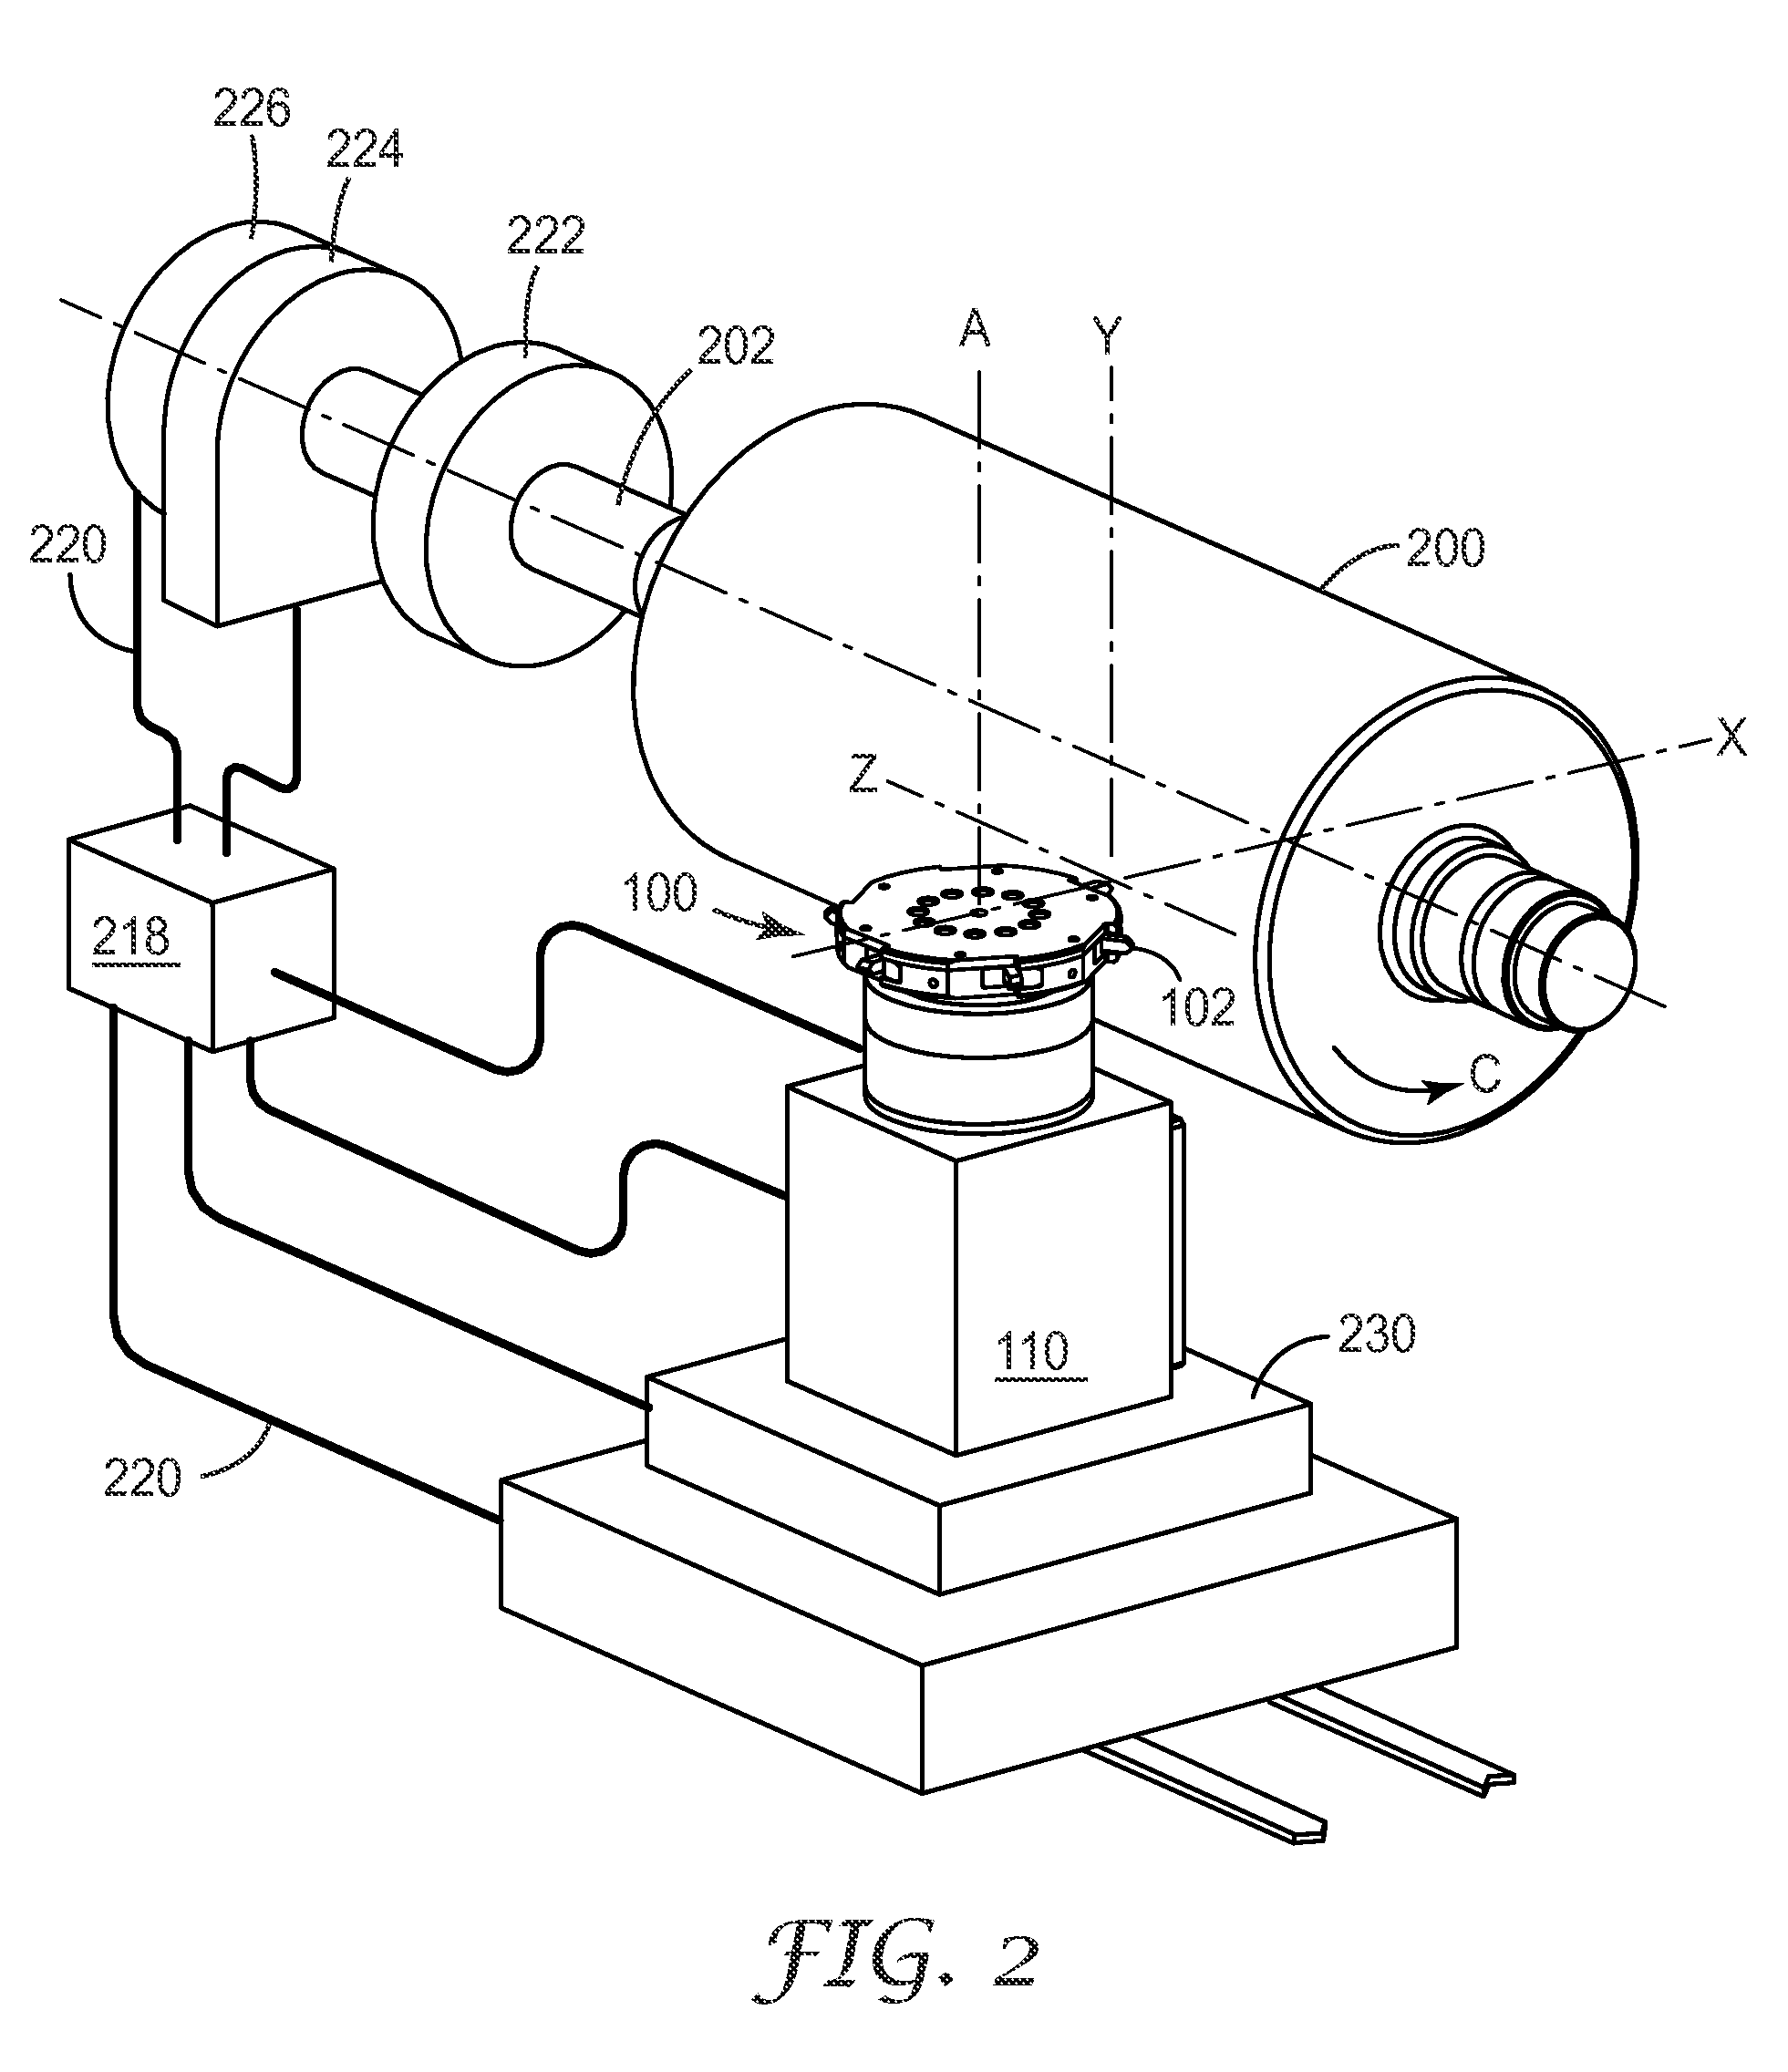 Fly-cutting system and method, and related tooling and articles